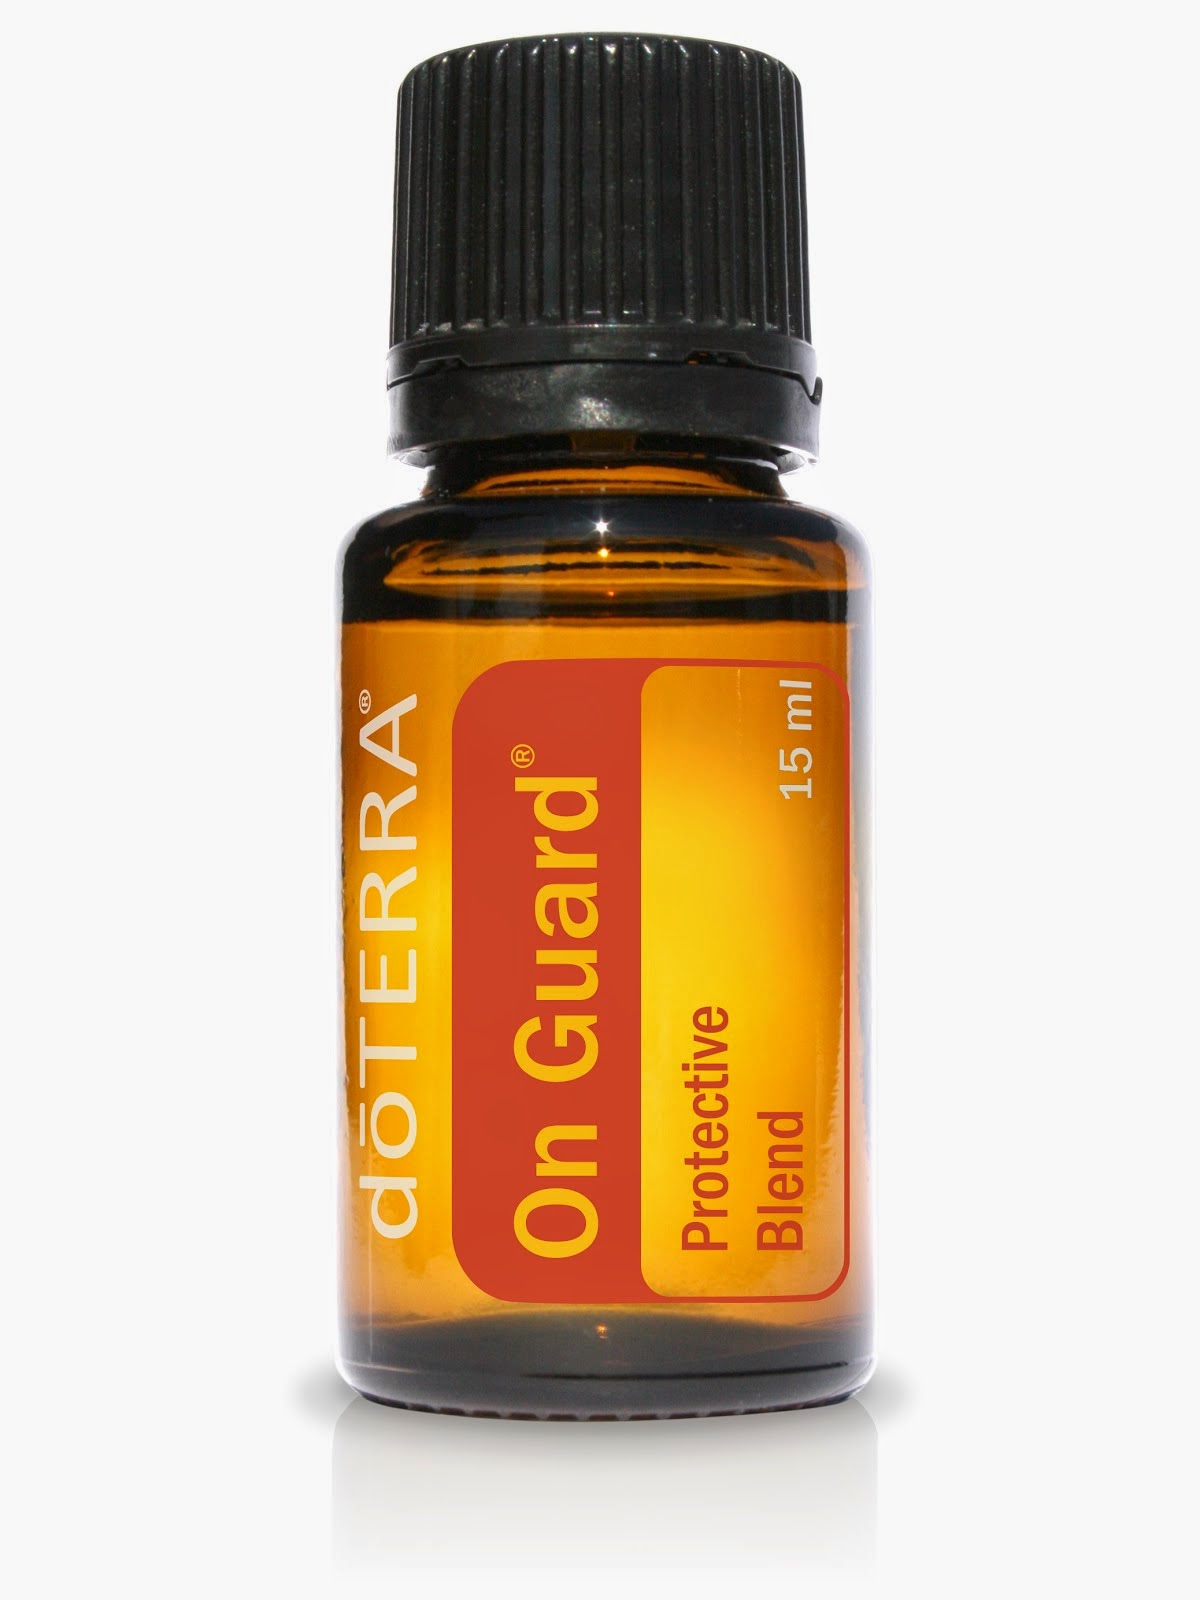 OnGuard Oil Blend - One of my favorite oils!